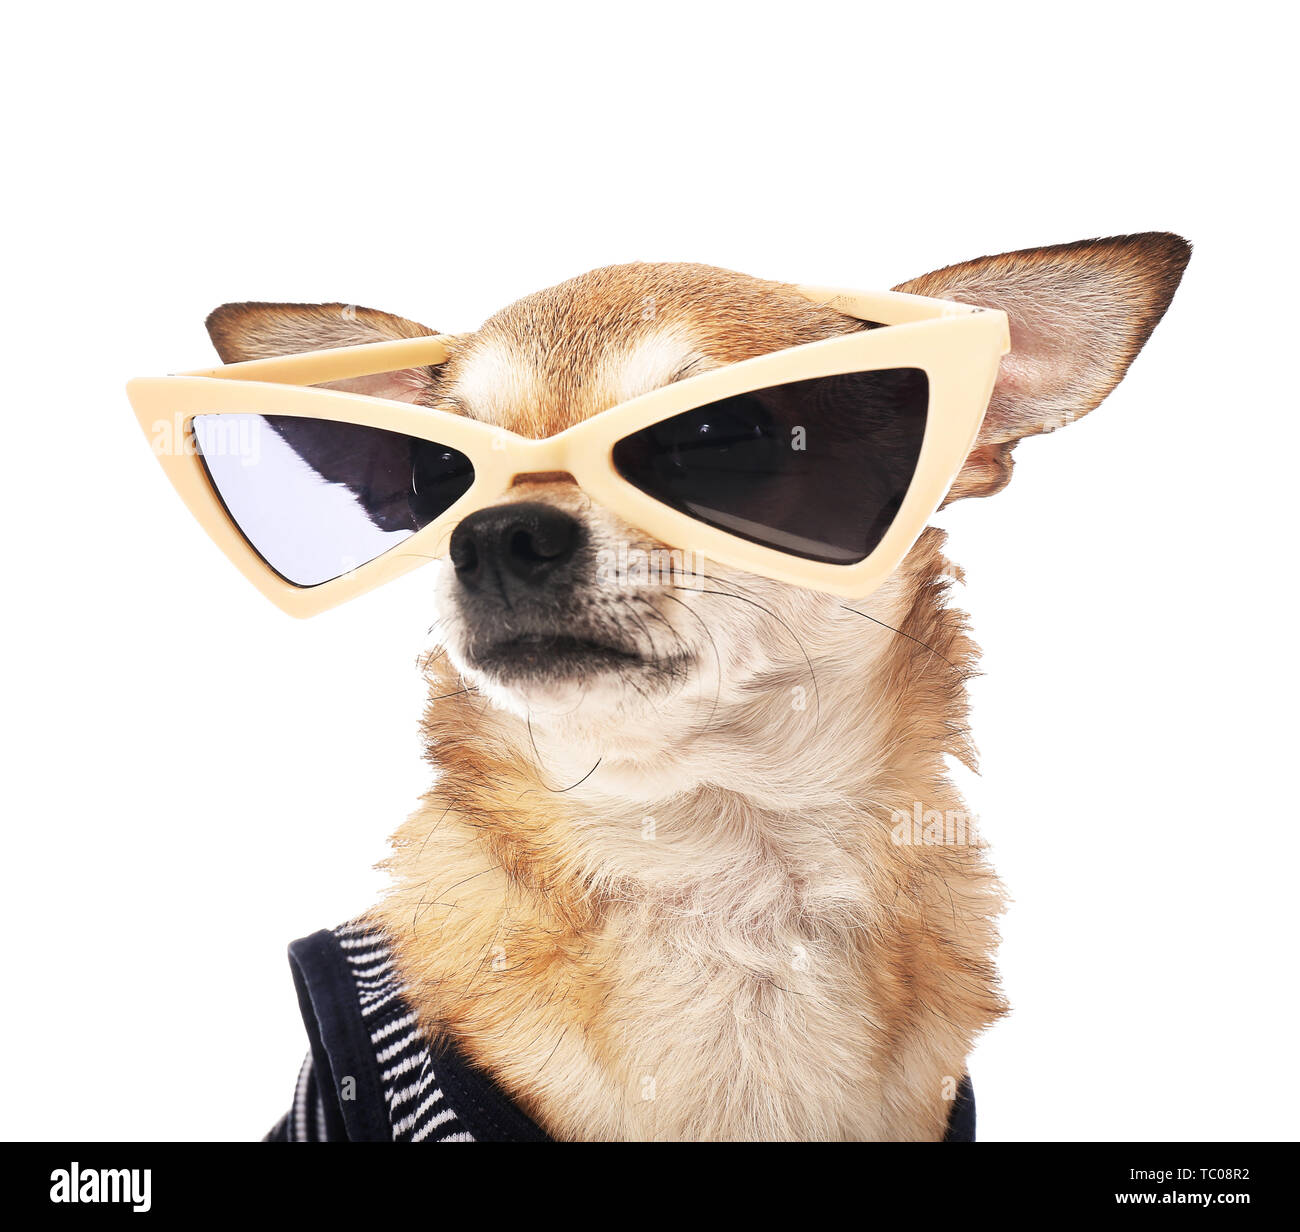 Vouwen Maryanne Jones meest Cute chihuahua dog with sunglasses on white background Stock Photo - Alamy